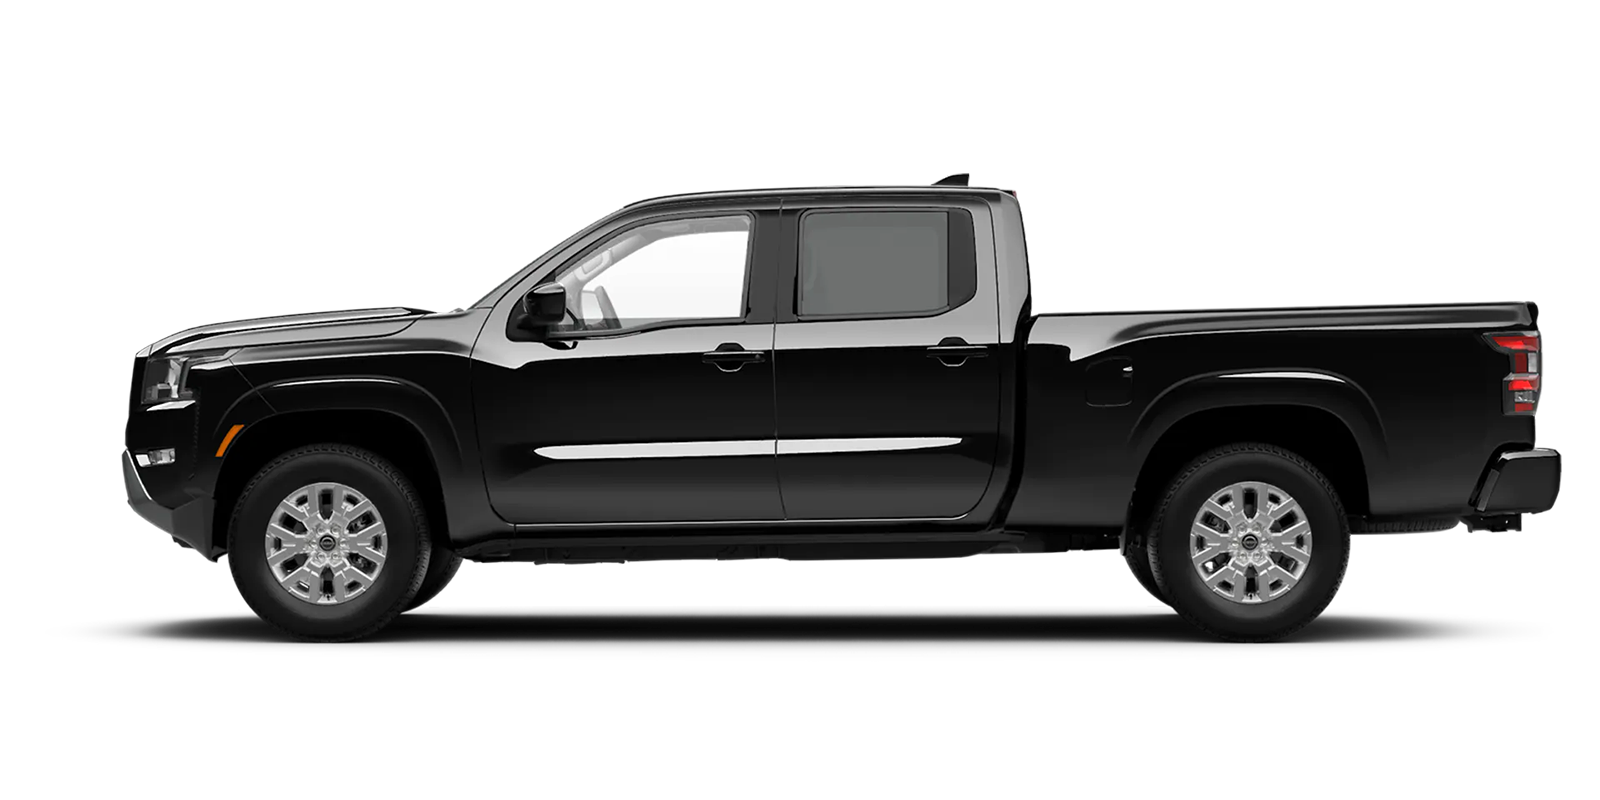 2022 Frontier Crew Cab Long Bed SV 4x2 in Super Black | Alan Webb Nissan in Vancouver WA